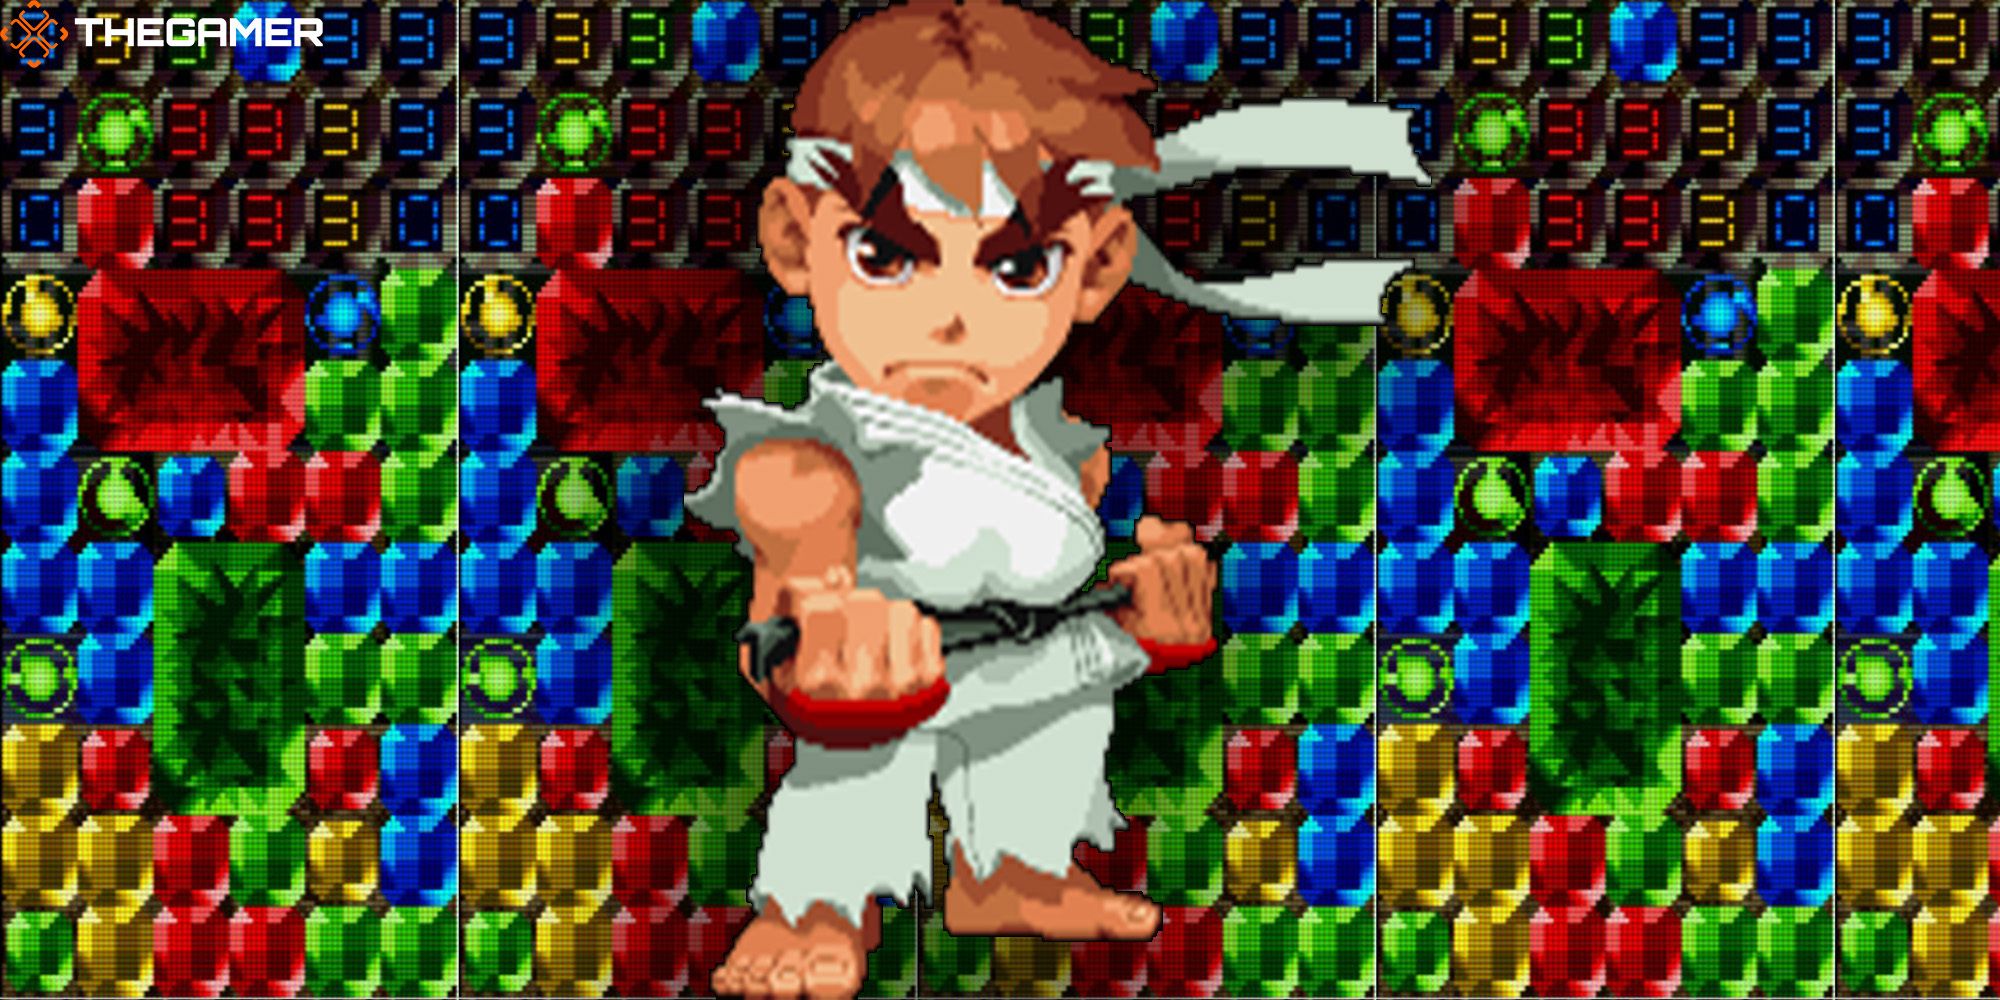 A chibi-sized Ryu stands against a wall of gems from Super Puzzle Fighter 2 Turbo, a game in Capcom Fighting Collection.